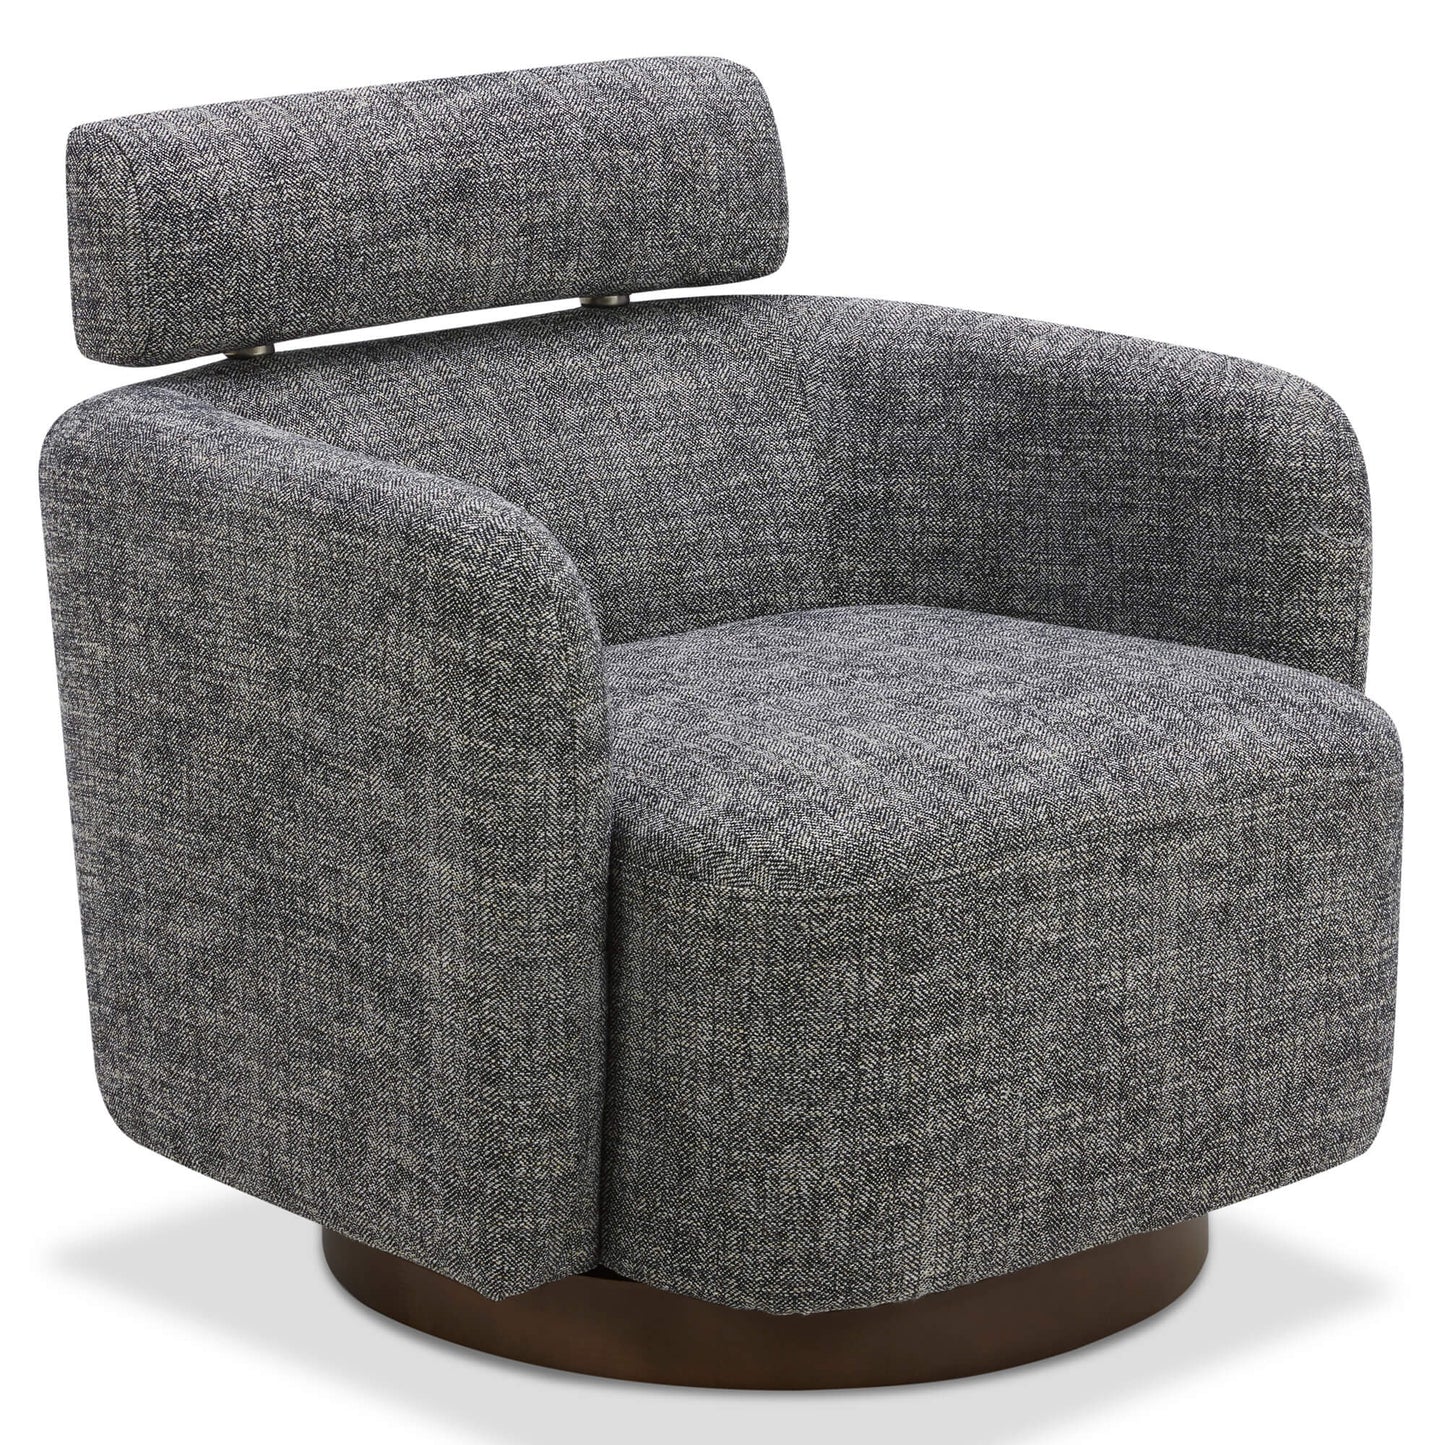 CHITA LIVING-Luna Swivel Accent Chair With Adjustable Backrest-Accent Chair-Fabric-Charcoal-